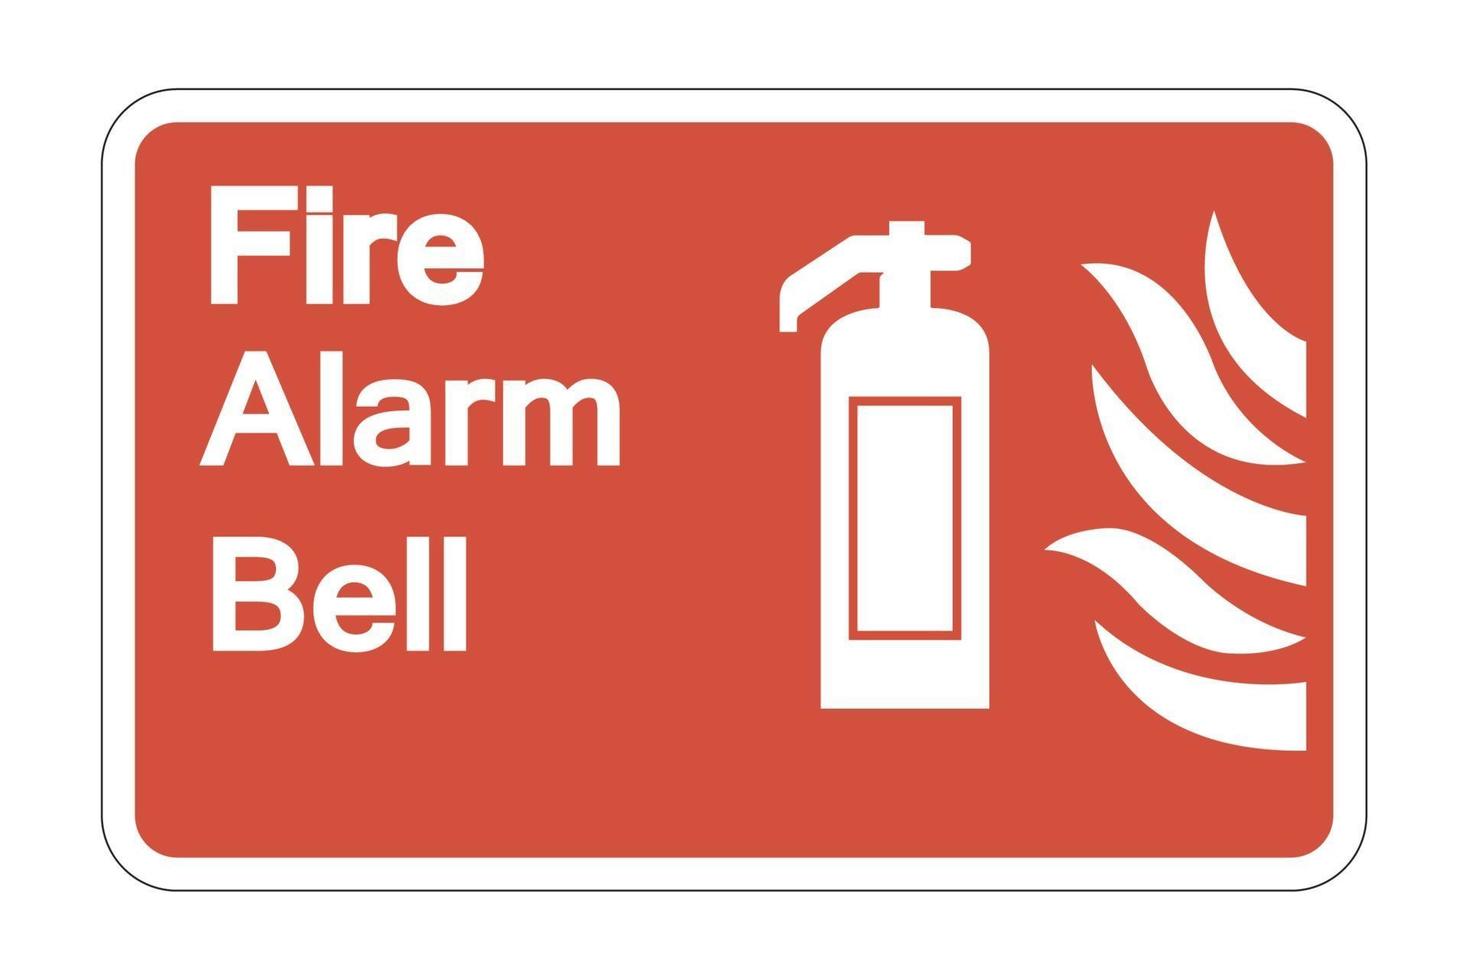 Fire Alarm Bell Safety Symbol Sign on white background,vector illustration vector